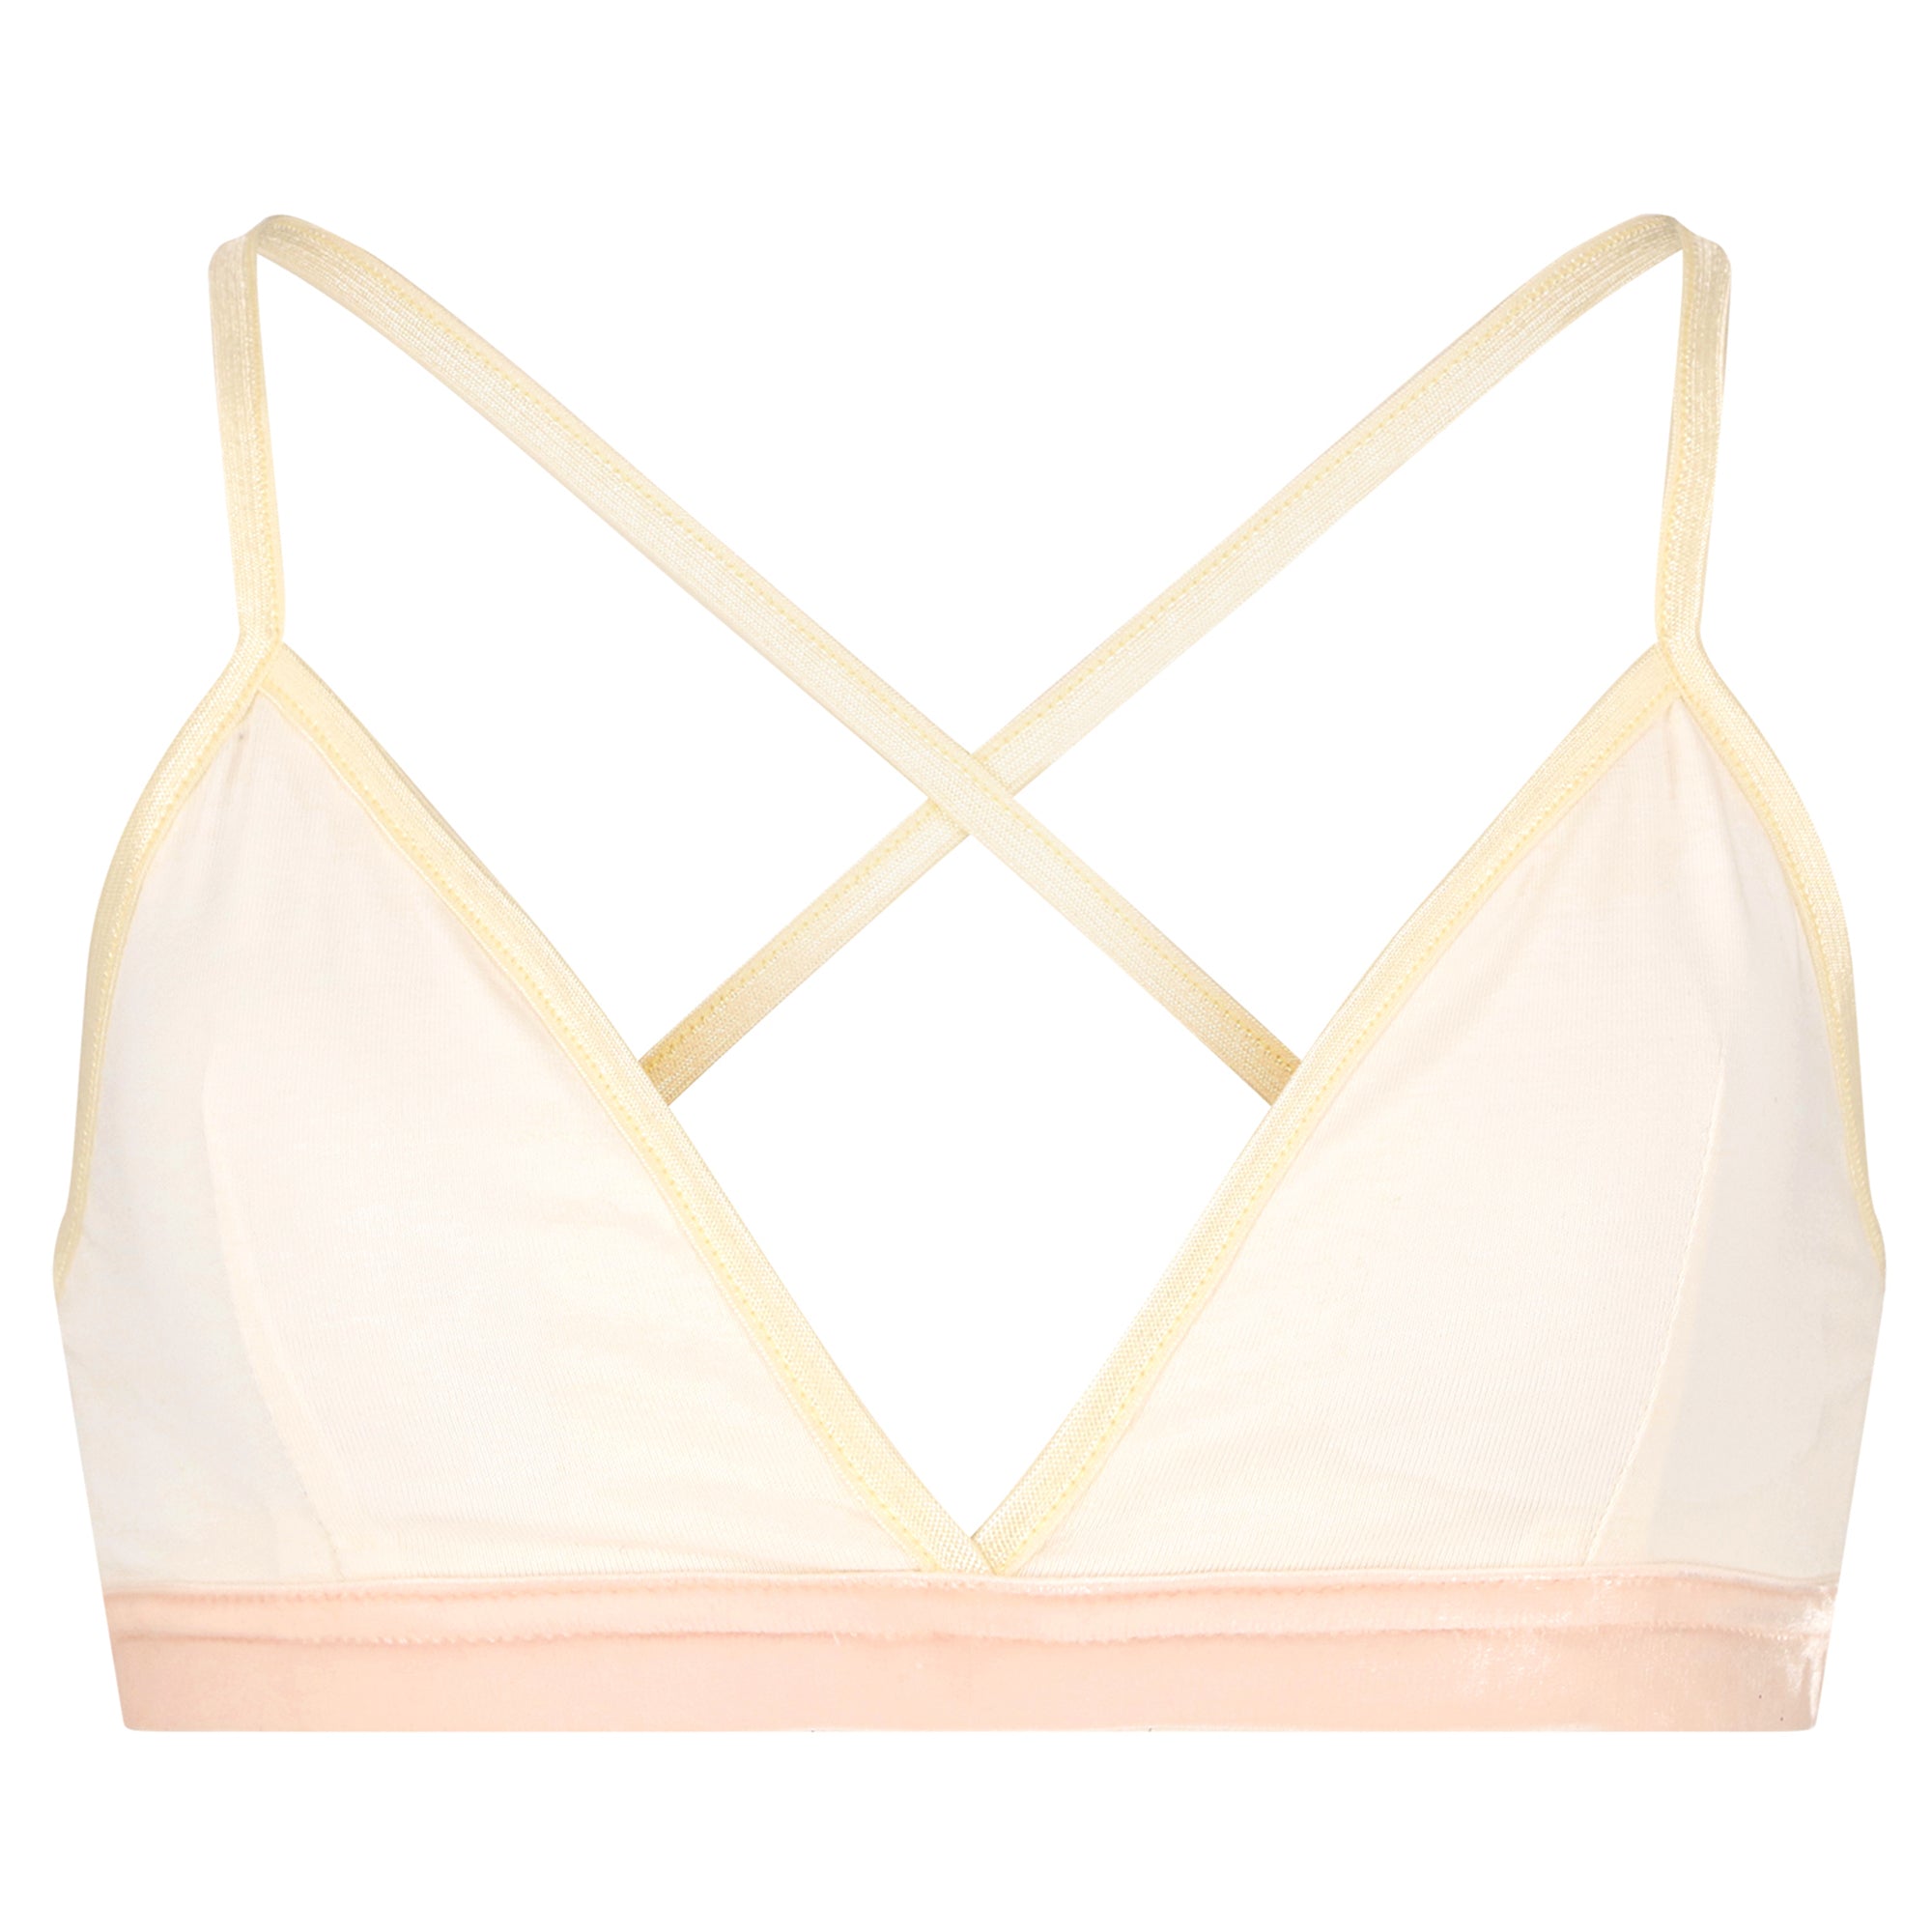 Bralette for young women in cream white, with removable pads and no itchy labels